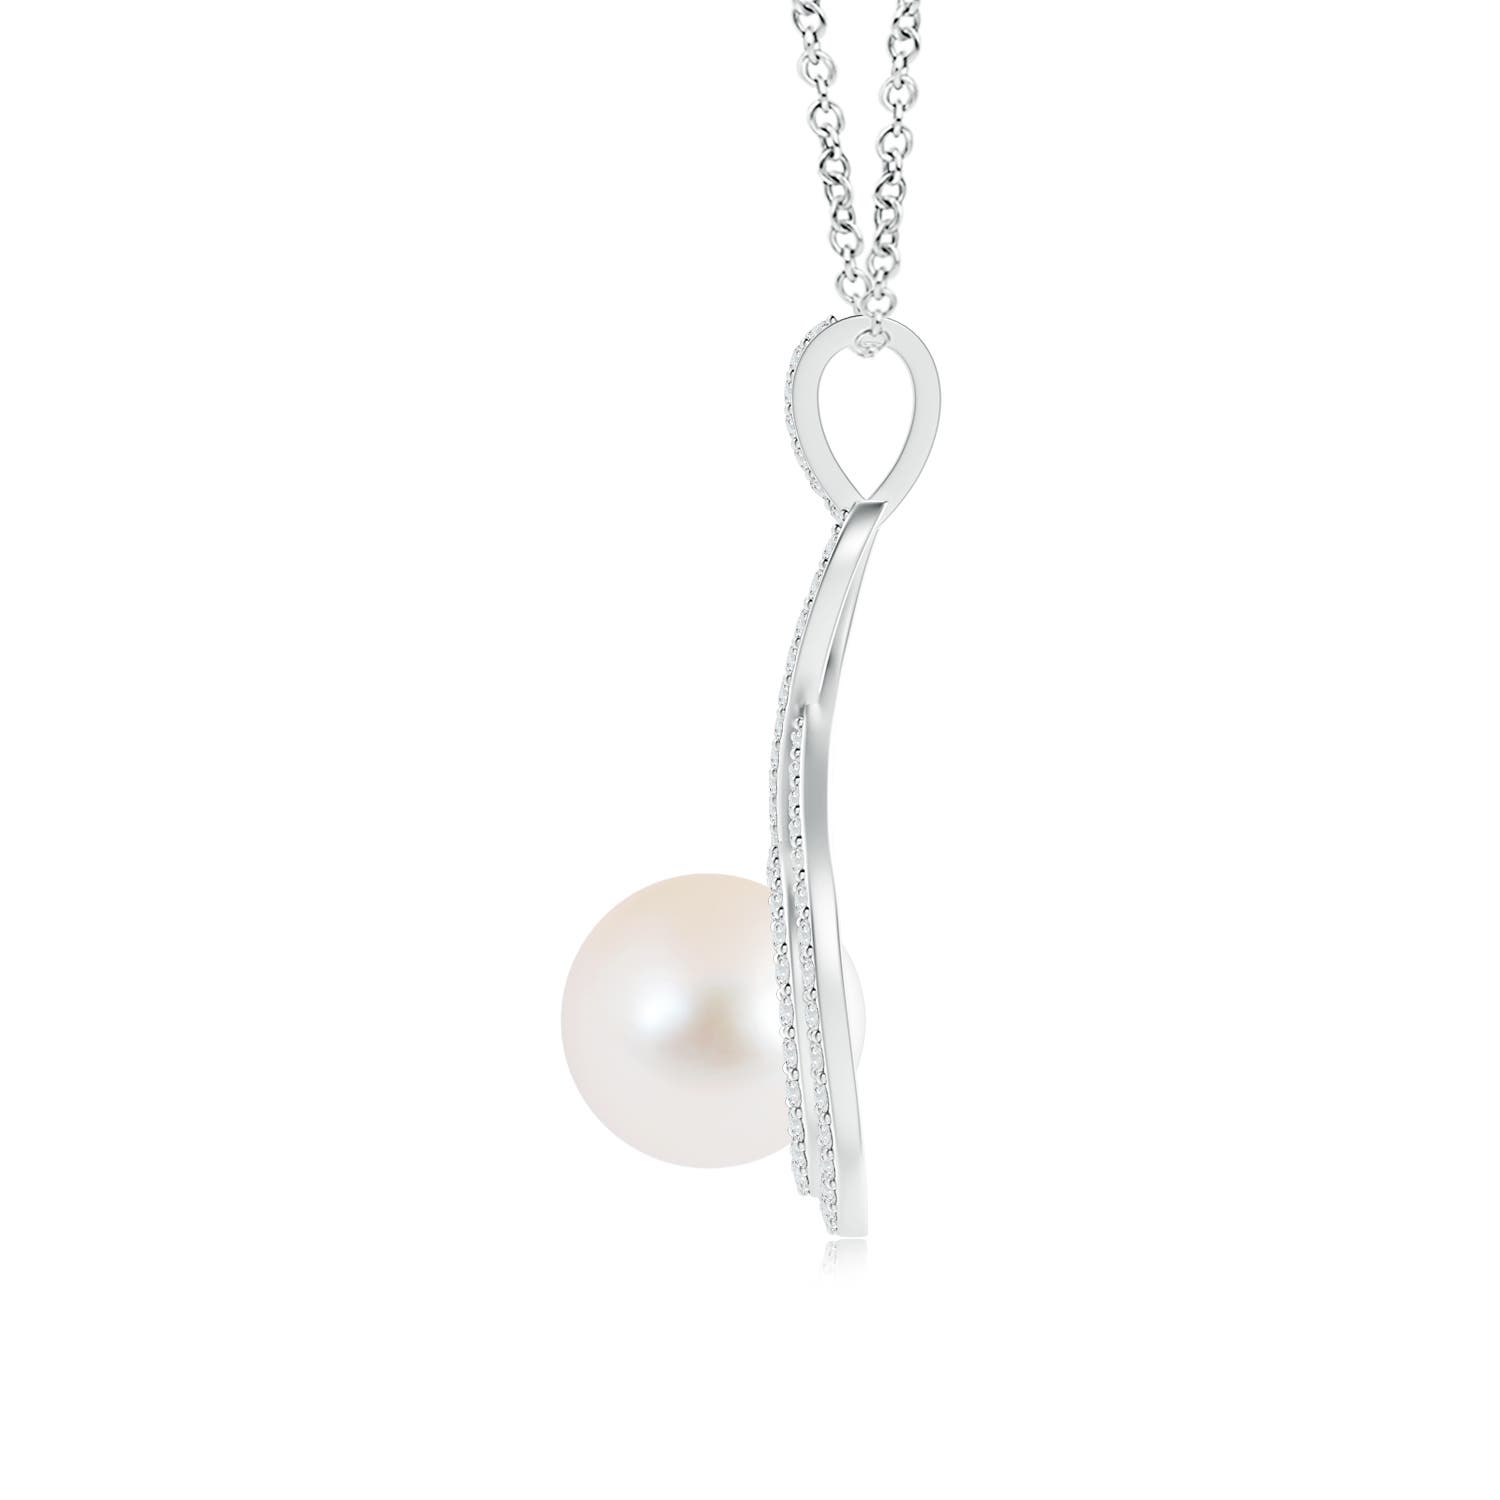 AAA - Freshwater Cultured Pearl / 5.69 CT / 14 KT White Gold